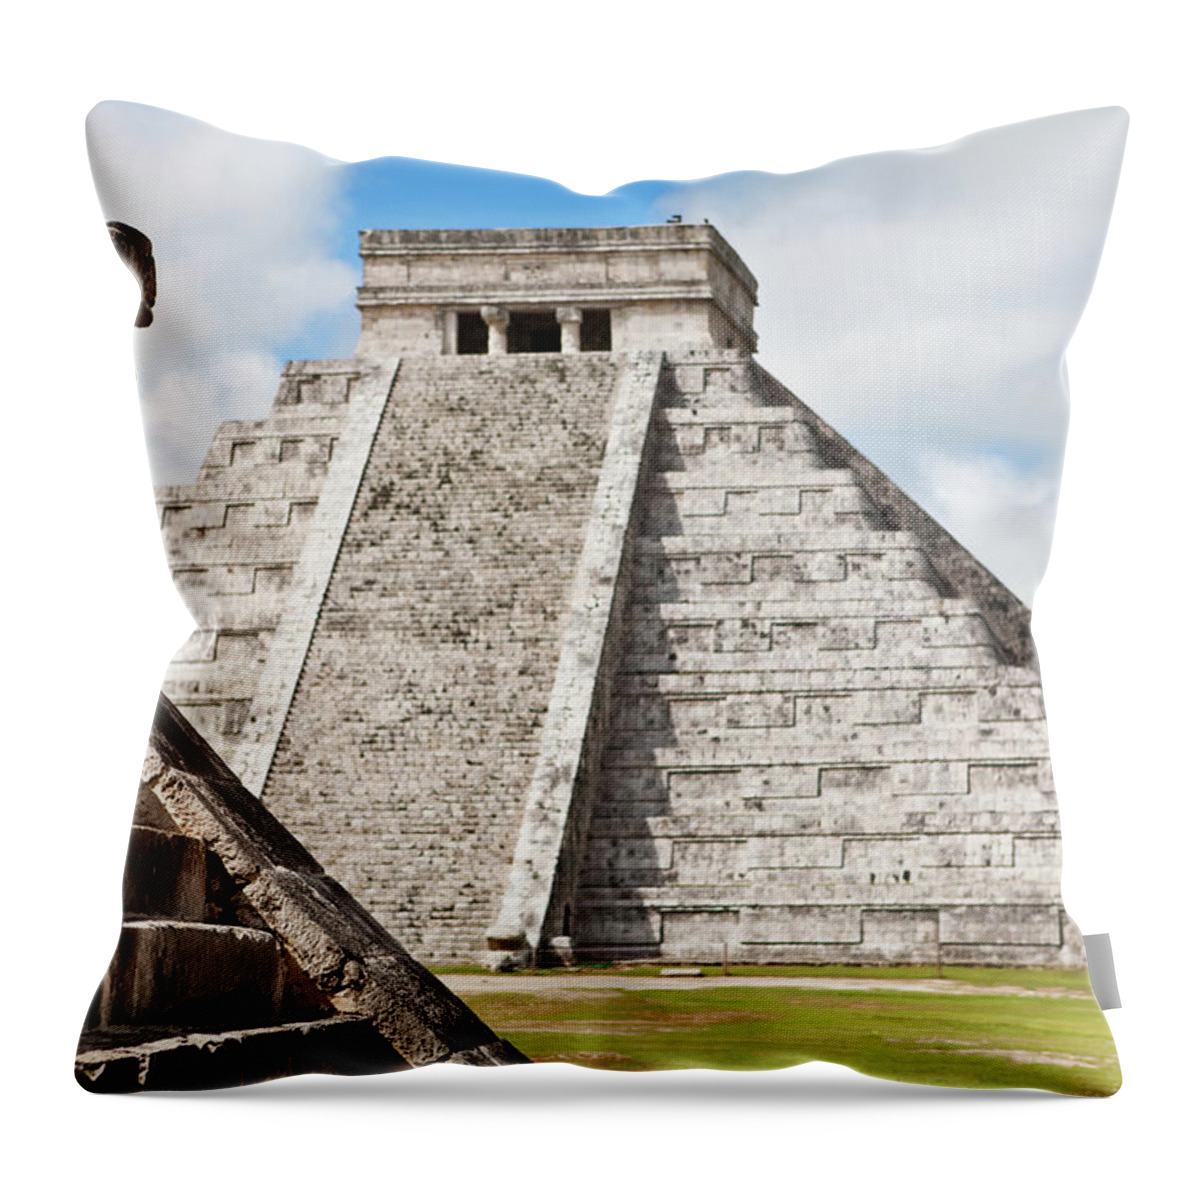 Steps Throw Pillow featuring the photograph Chichen Itza by Pedre